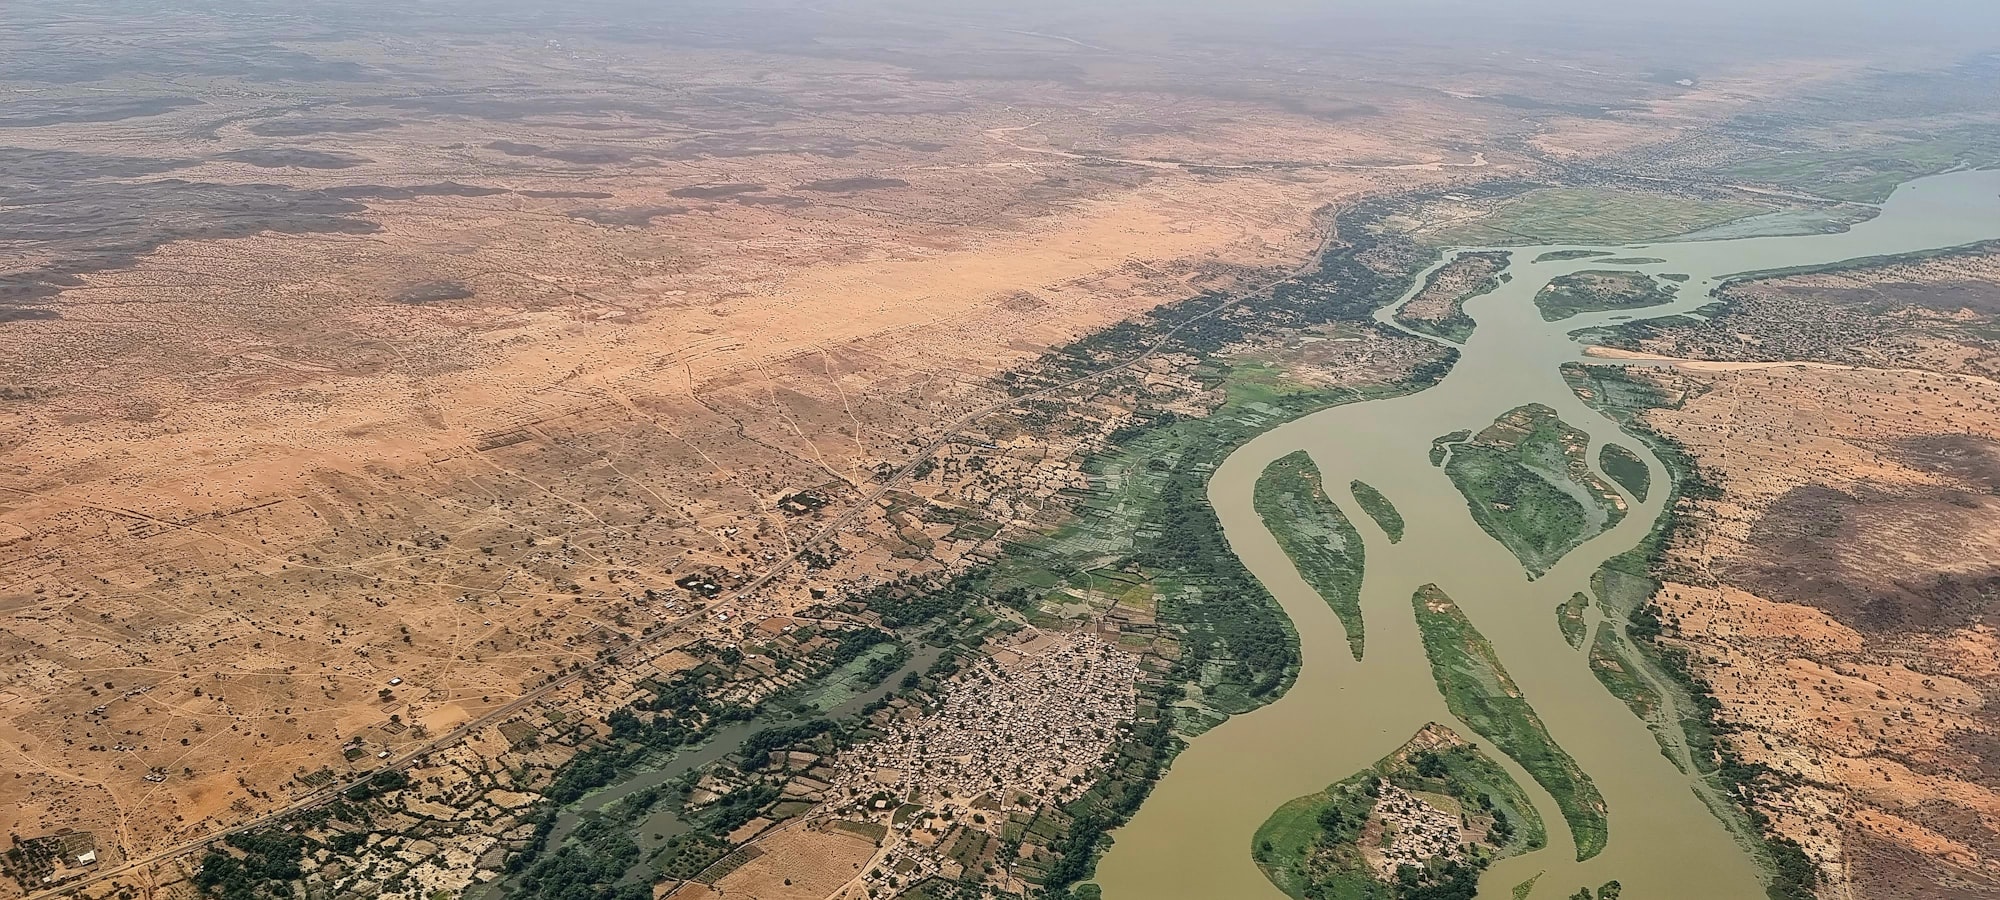 A narrow strip of river in the Sahel, with desert stretching away in the distance.